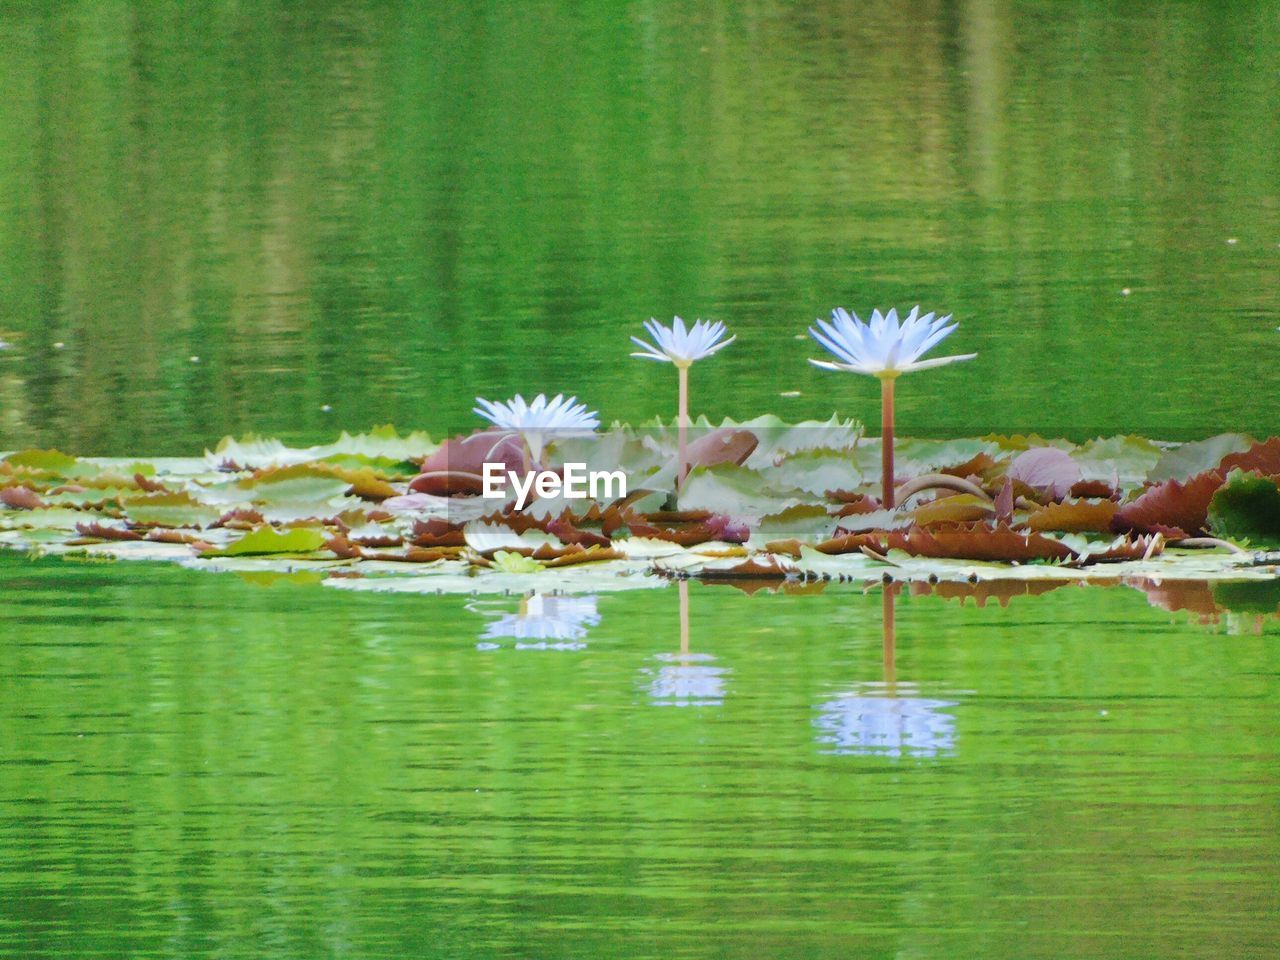 VIEW OF WATER LILIES IN LAKE